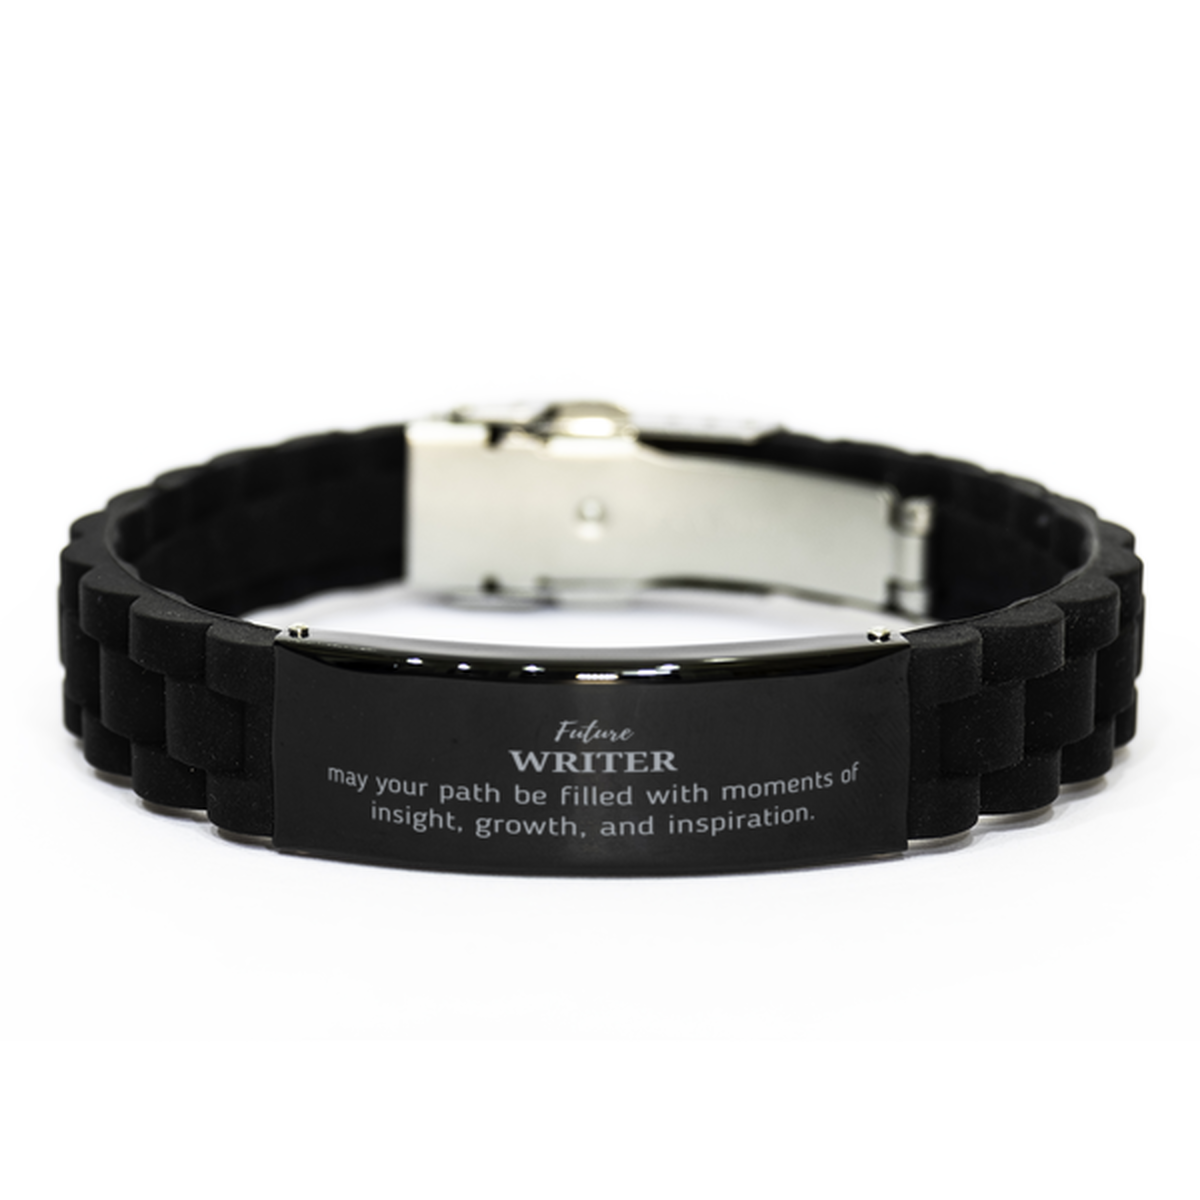 Future Writer Gifts, May your path be filled with moments of insight, Graduation Gifts for New Writer, Christmas Unique Black Glidelock Clasp Bracelet For Men, Women, Friends